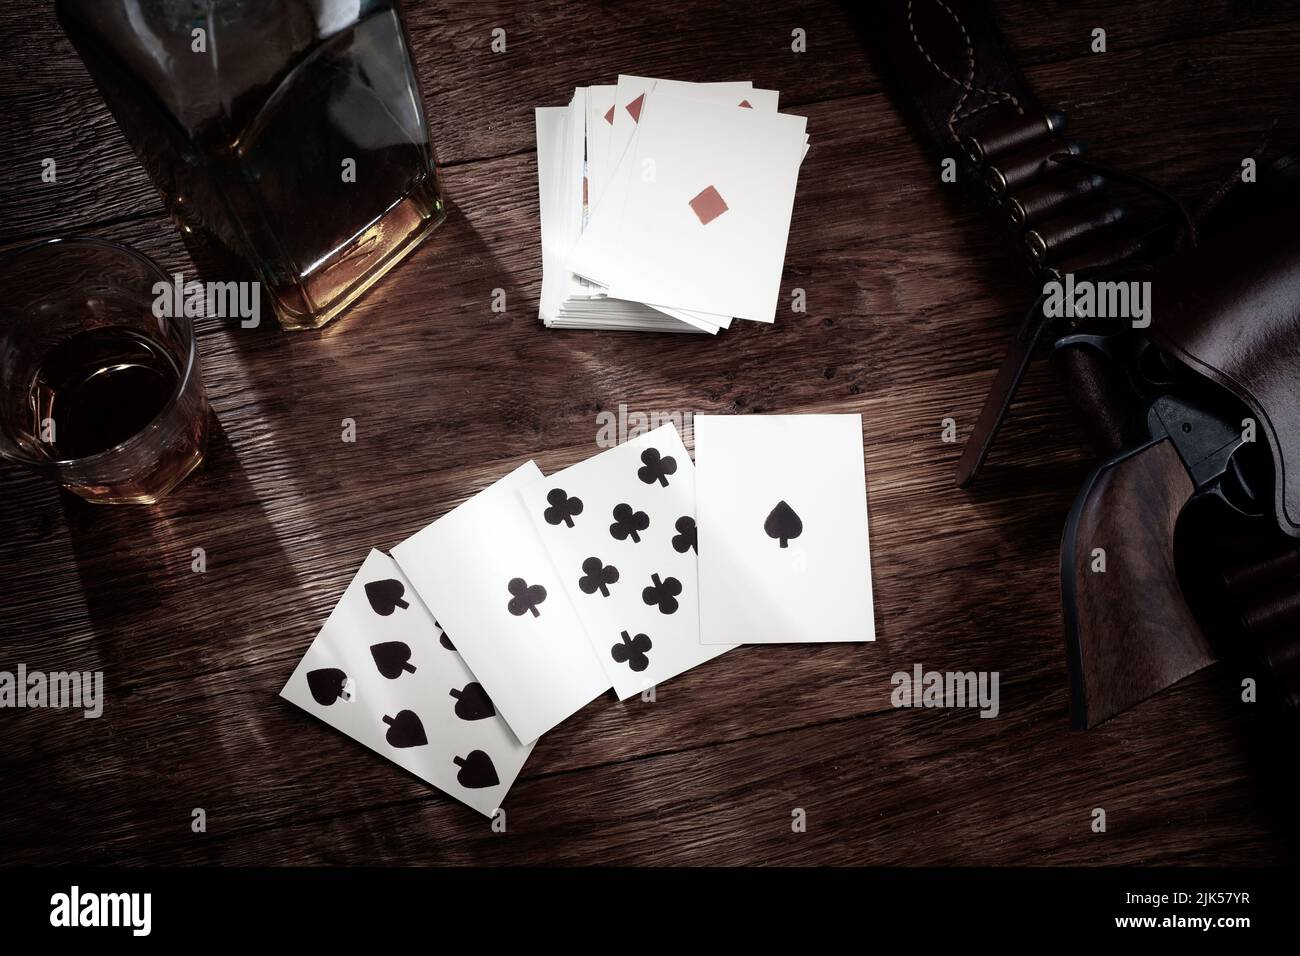 Old west poker. Dead man's hand. Two-pair poker hand consisting of the black aces and black eights, held by Old West gunfighter Wild Bill Hickok when Stock Photo